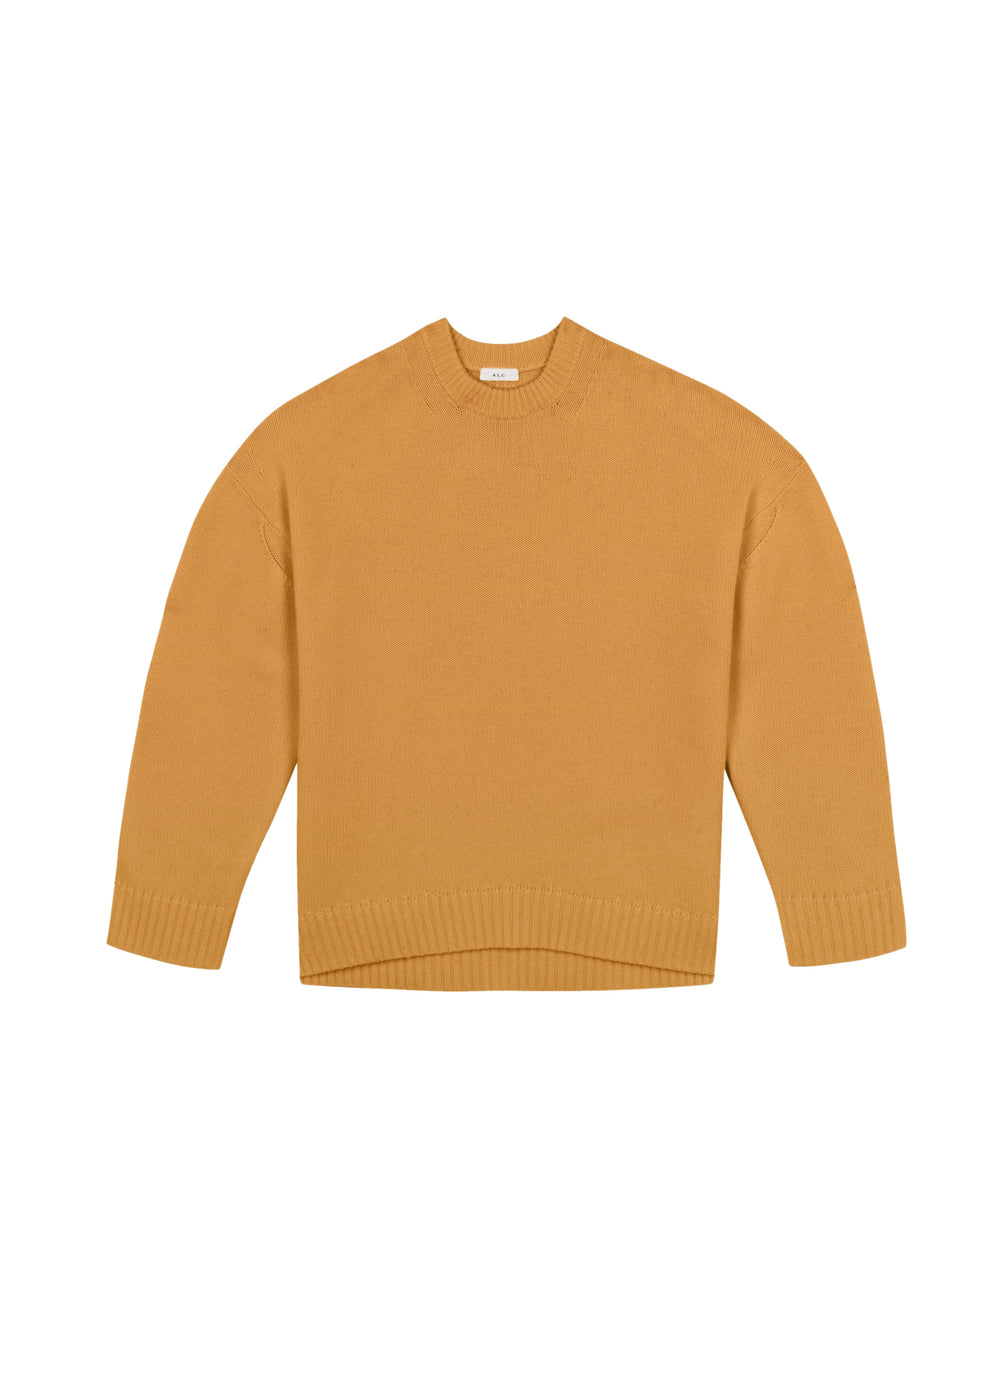 flat lay view of woman wearing tan cashmere long sleeve sweater